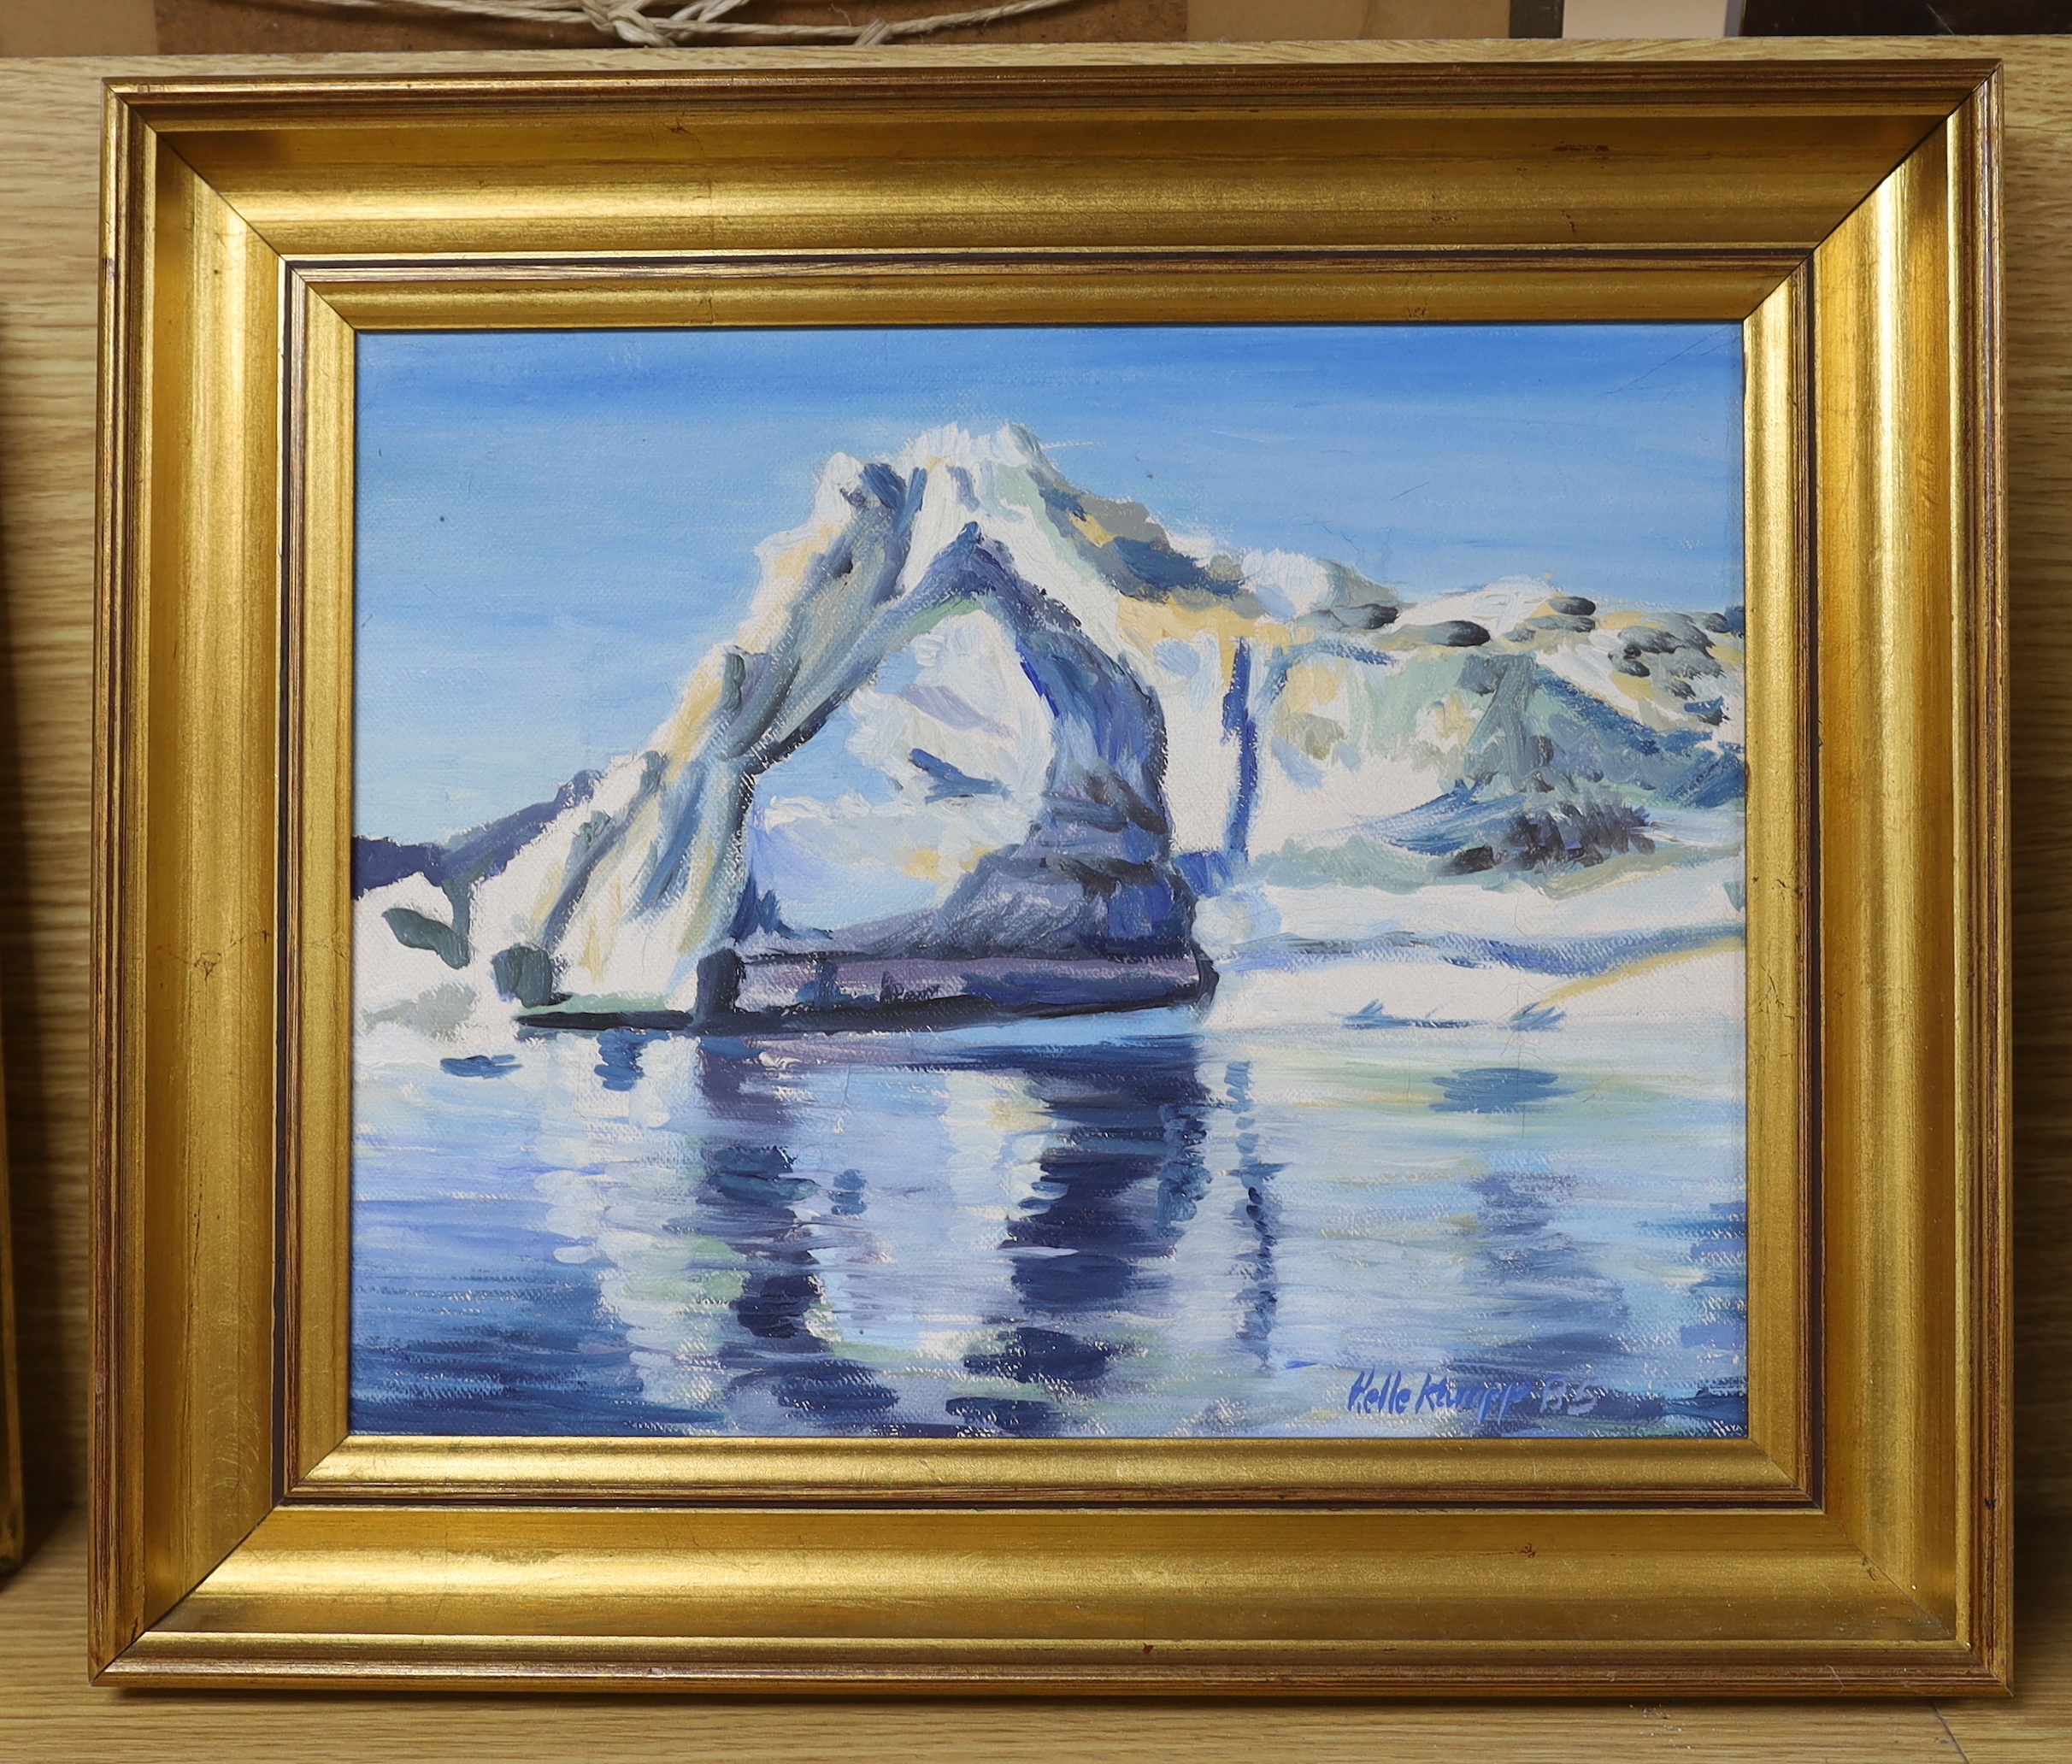 Oil on canvas, Greenland ice arch, indistinctly signed and dated '85, inscribed postcard verso, 23 x - Image 2 of 3